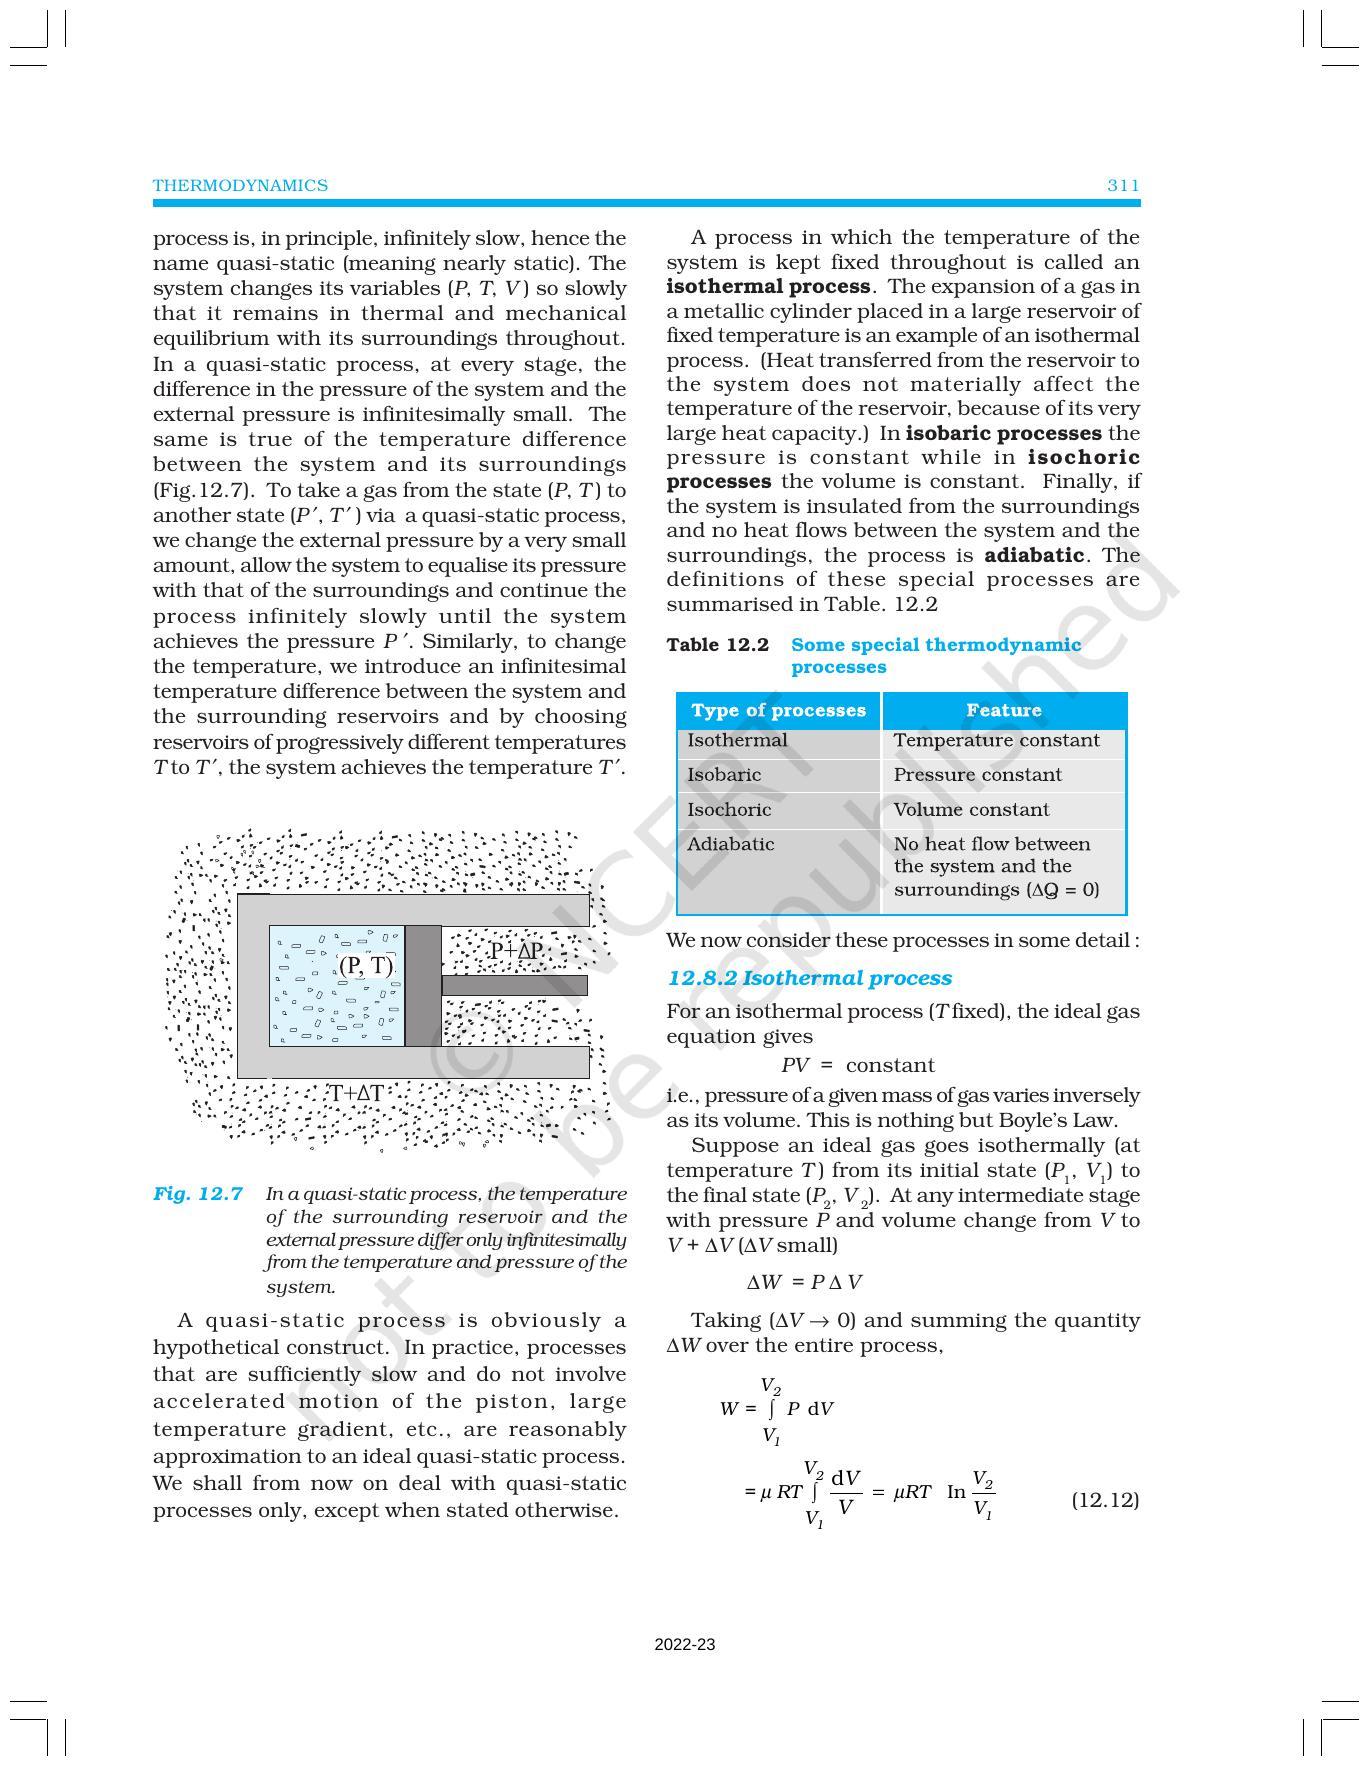 NCERT Book for Class 11 Physics Chapter 12 Thermodynamics - Page 9